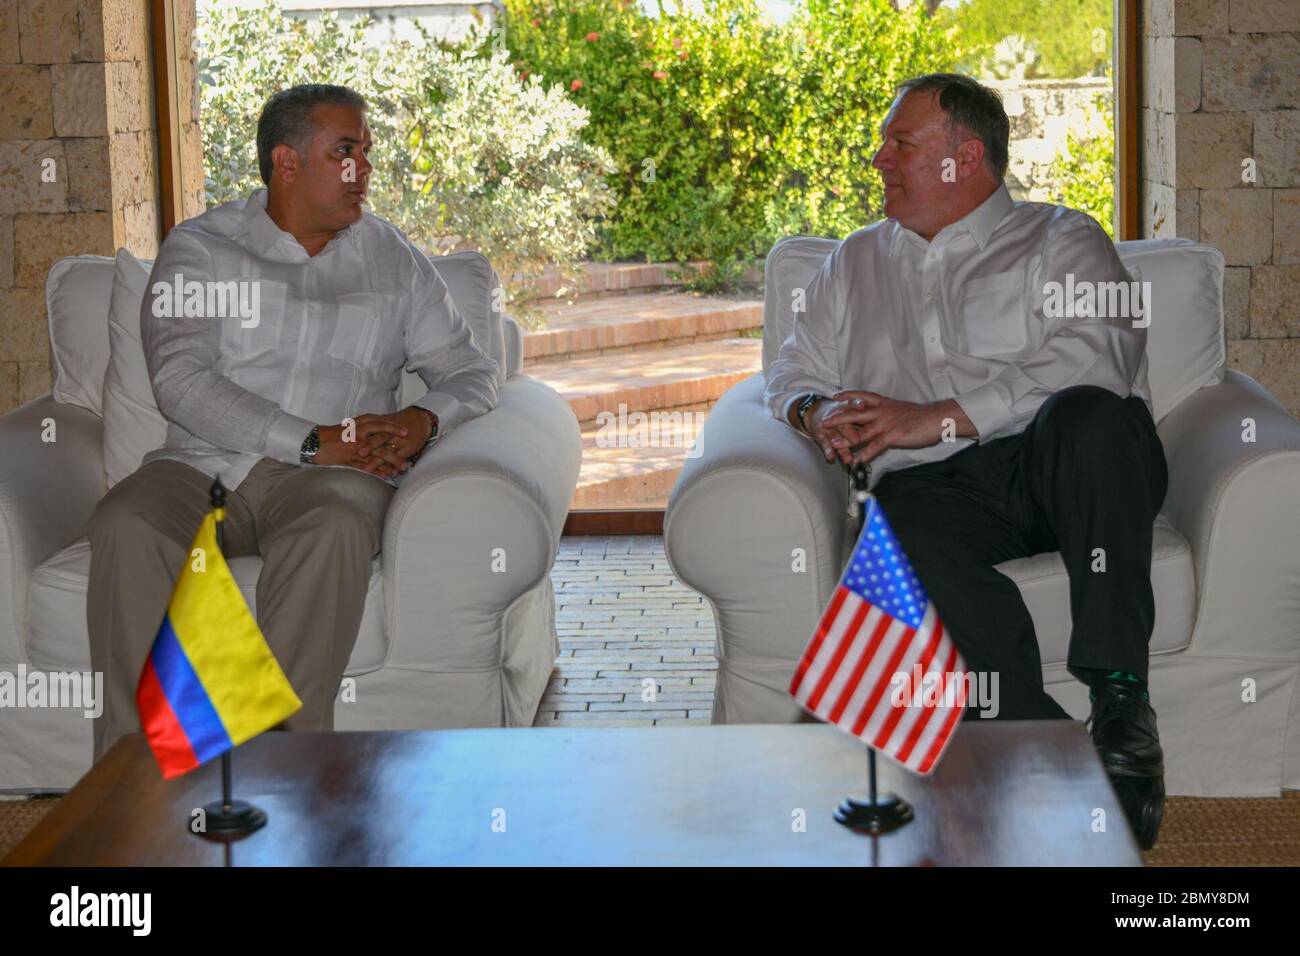 Secretary Pompeo Meets With Colombian President Ivan Duque U.S. Secretary of State Michael R. Pompeo meets with Colombian President Ivan Duque, in Cartagena, Colombia, January 2, 2019. Stock Photo